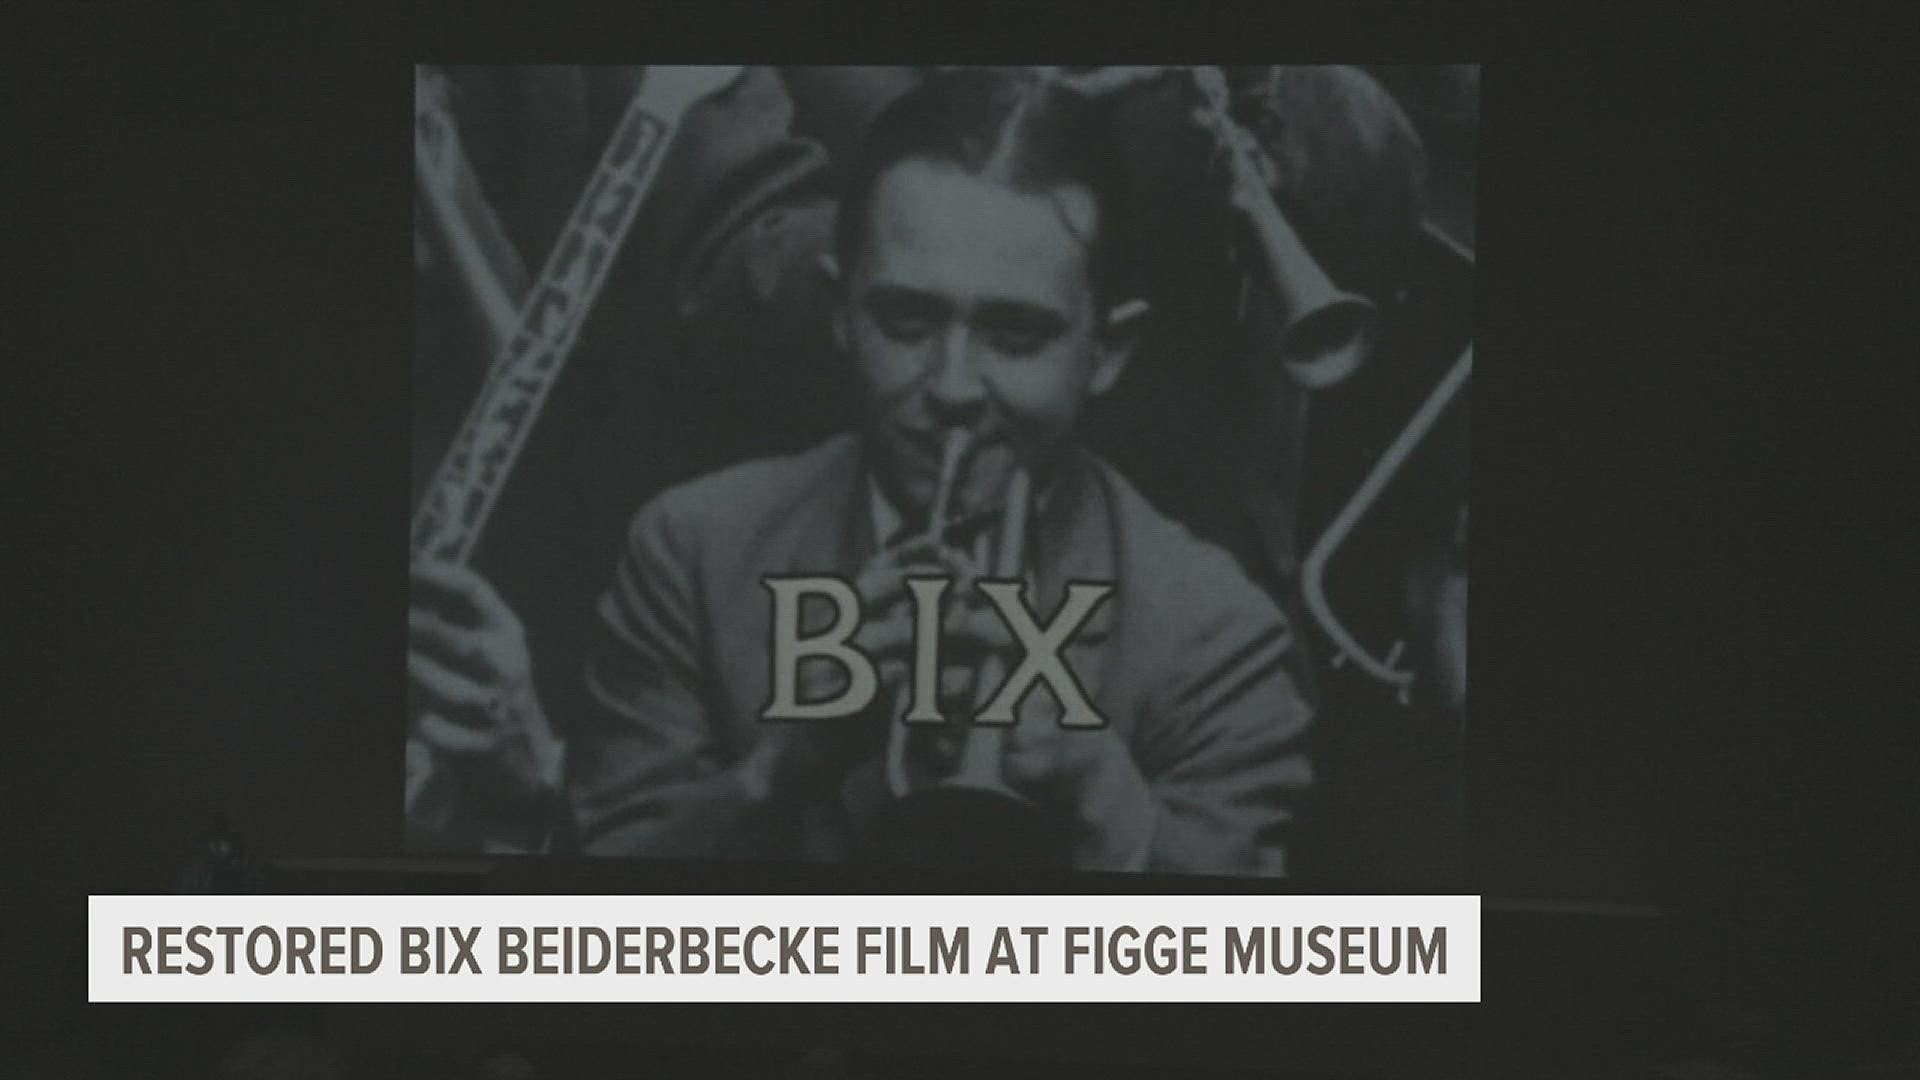 The film on Bix Beiderbecke is playing for the first time in the Quad Cities.